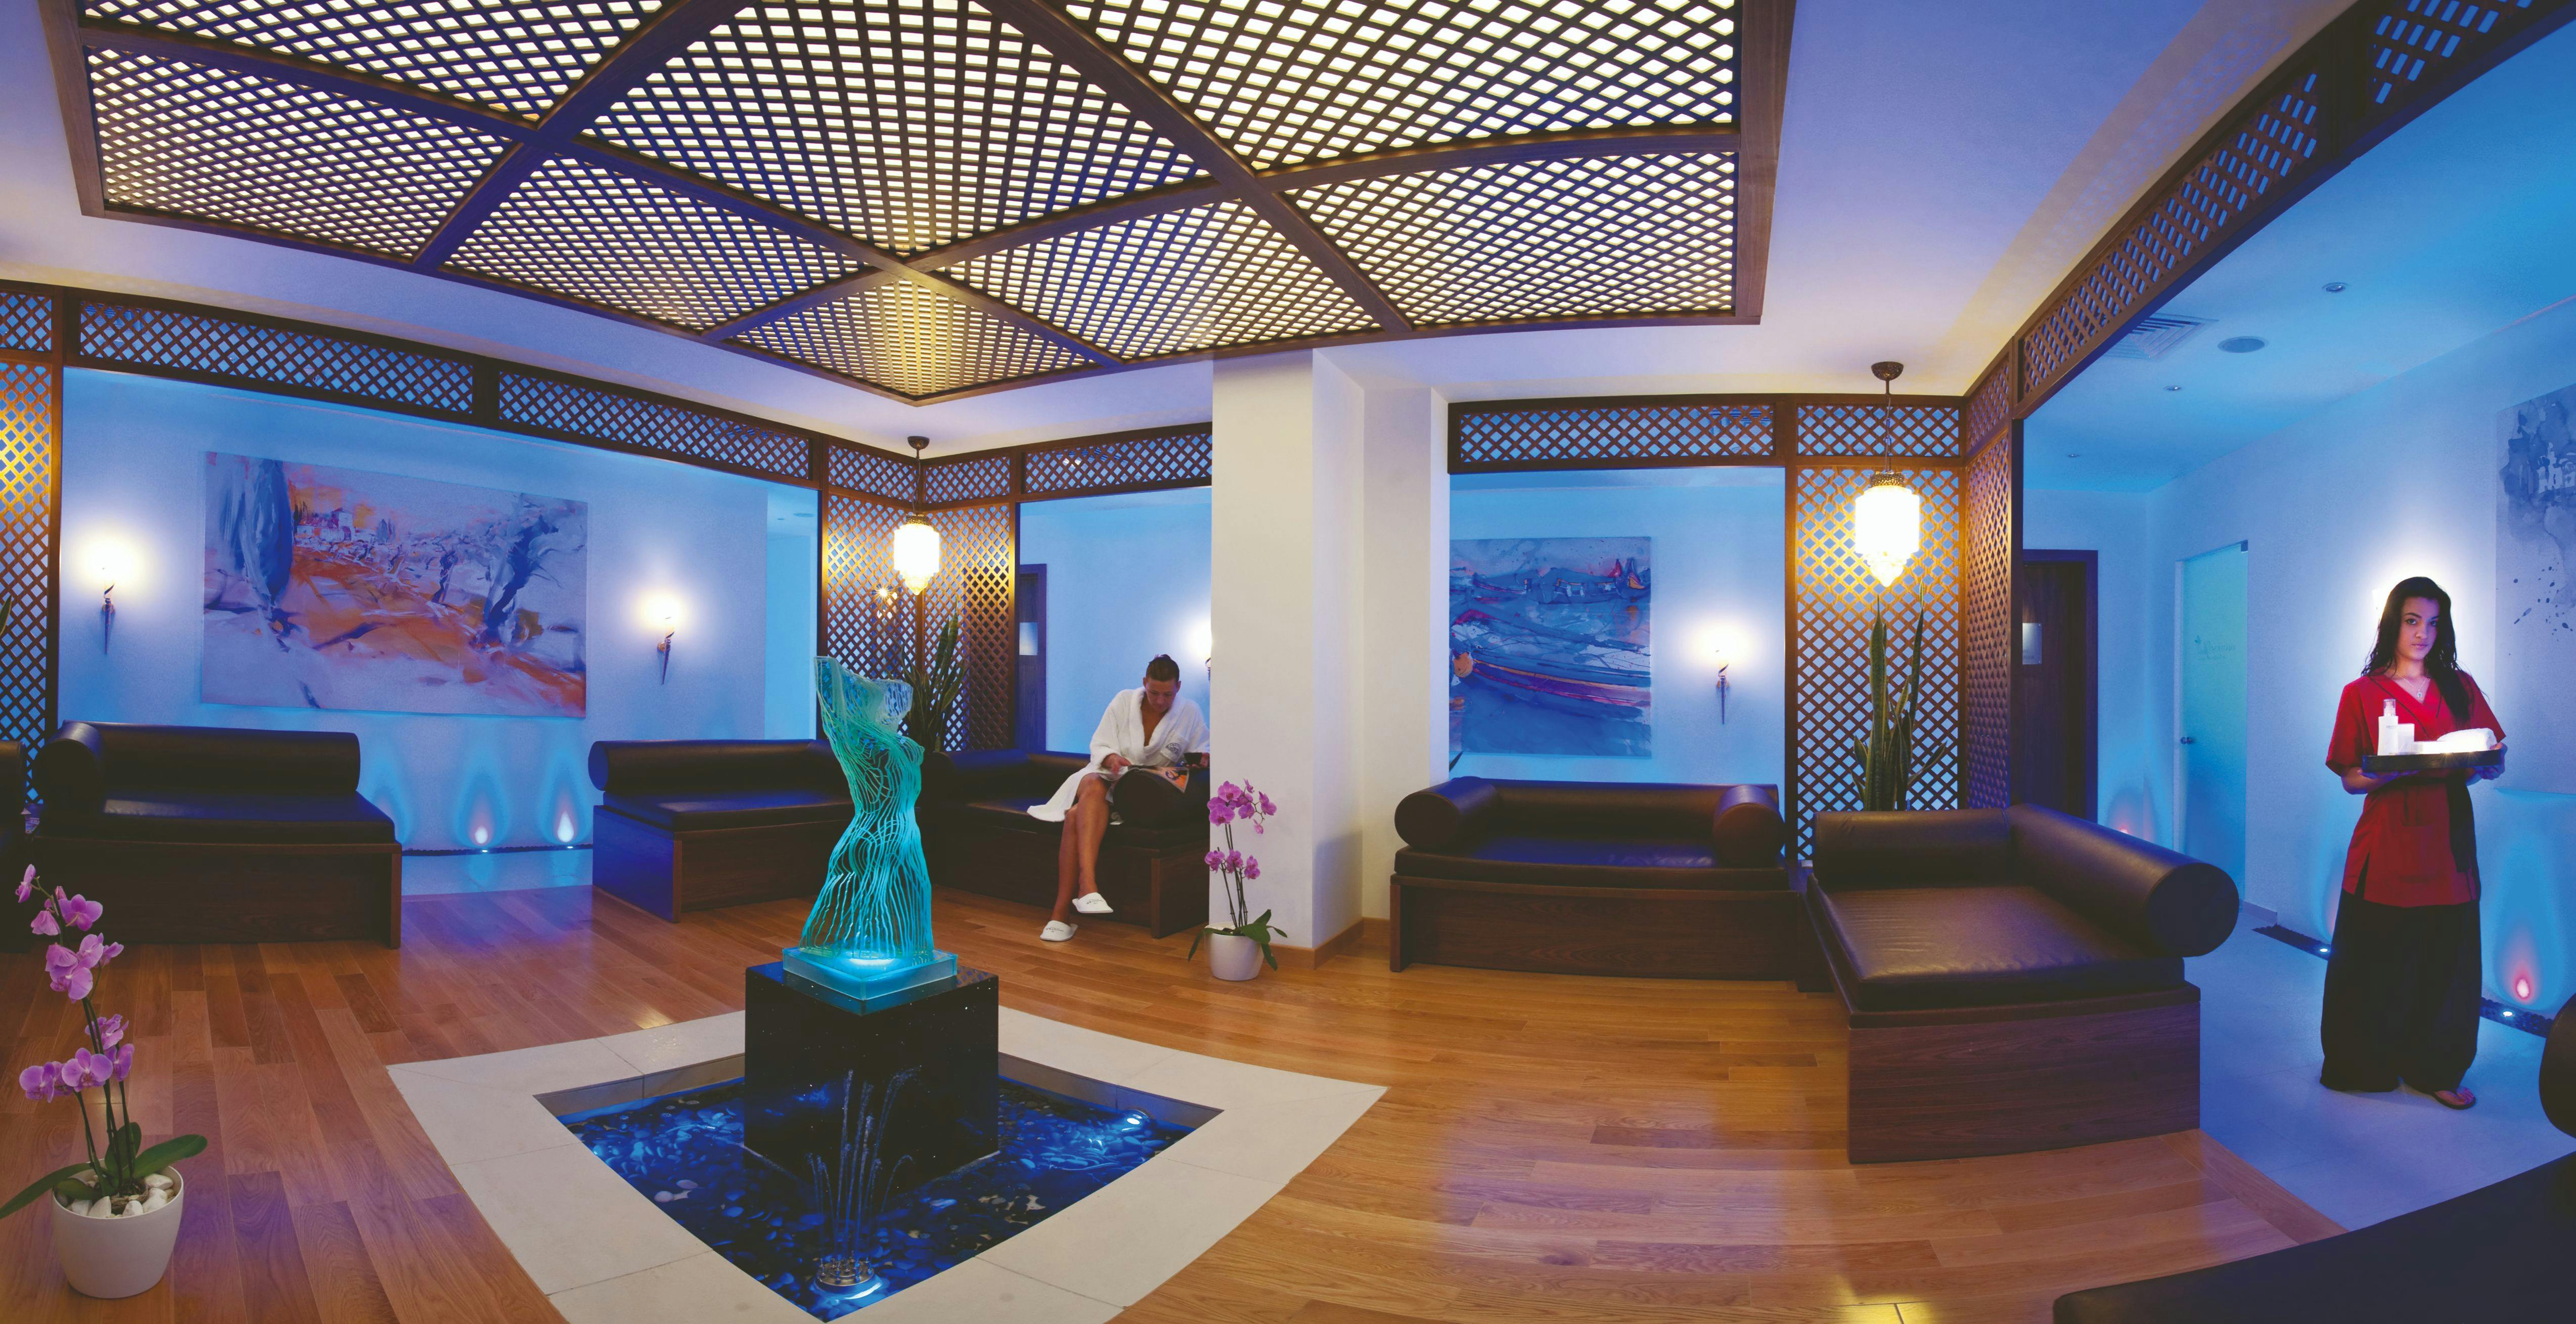 Spa relaxing area